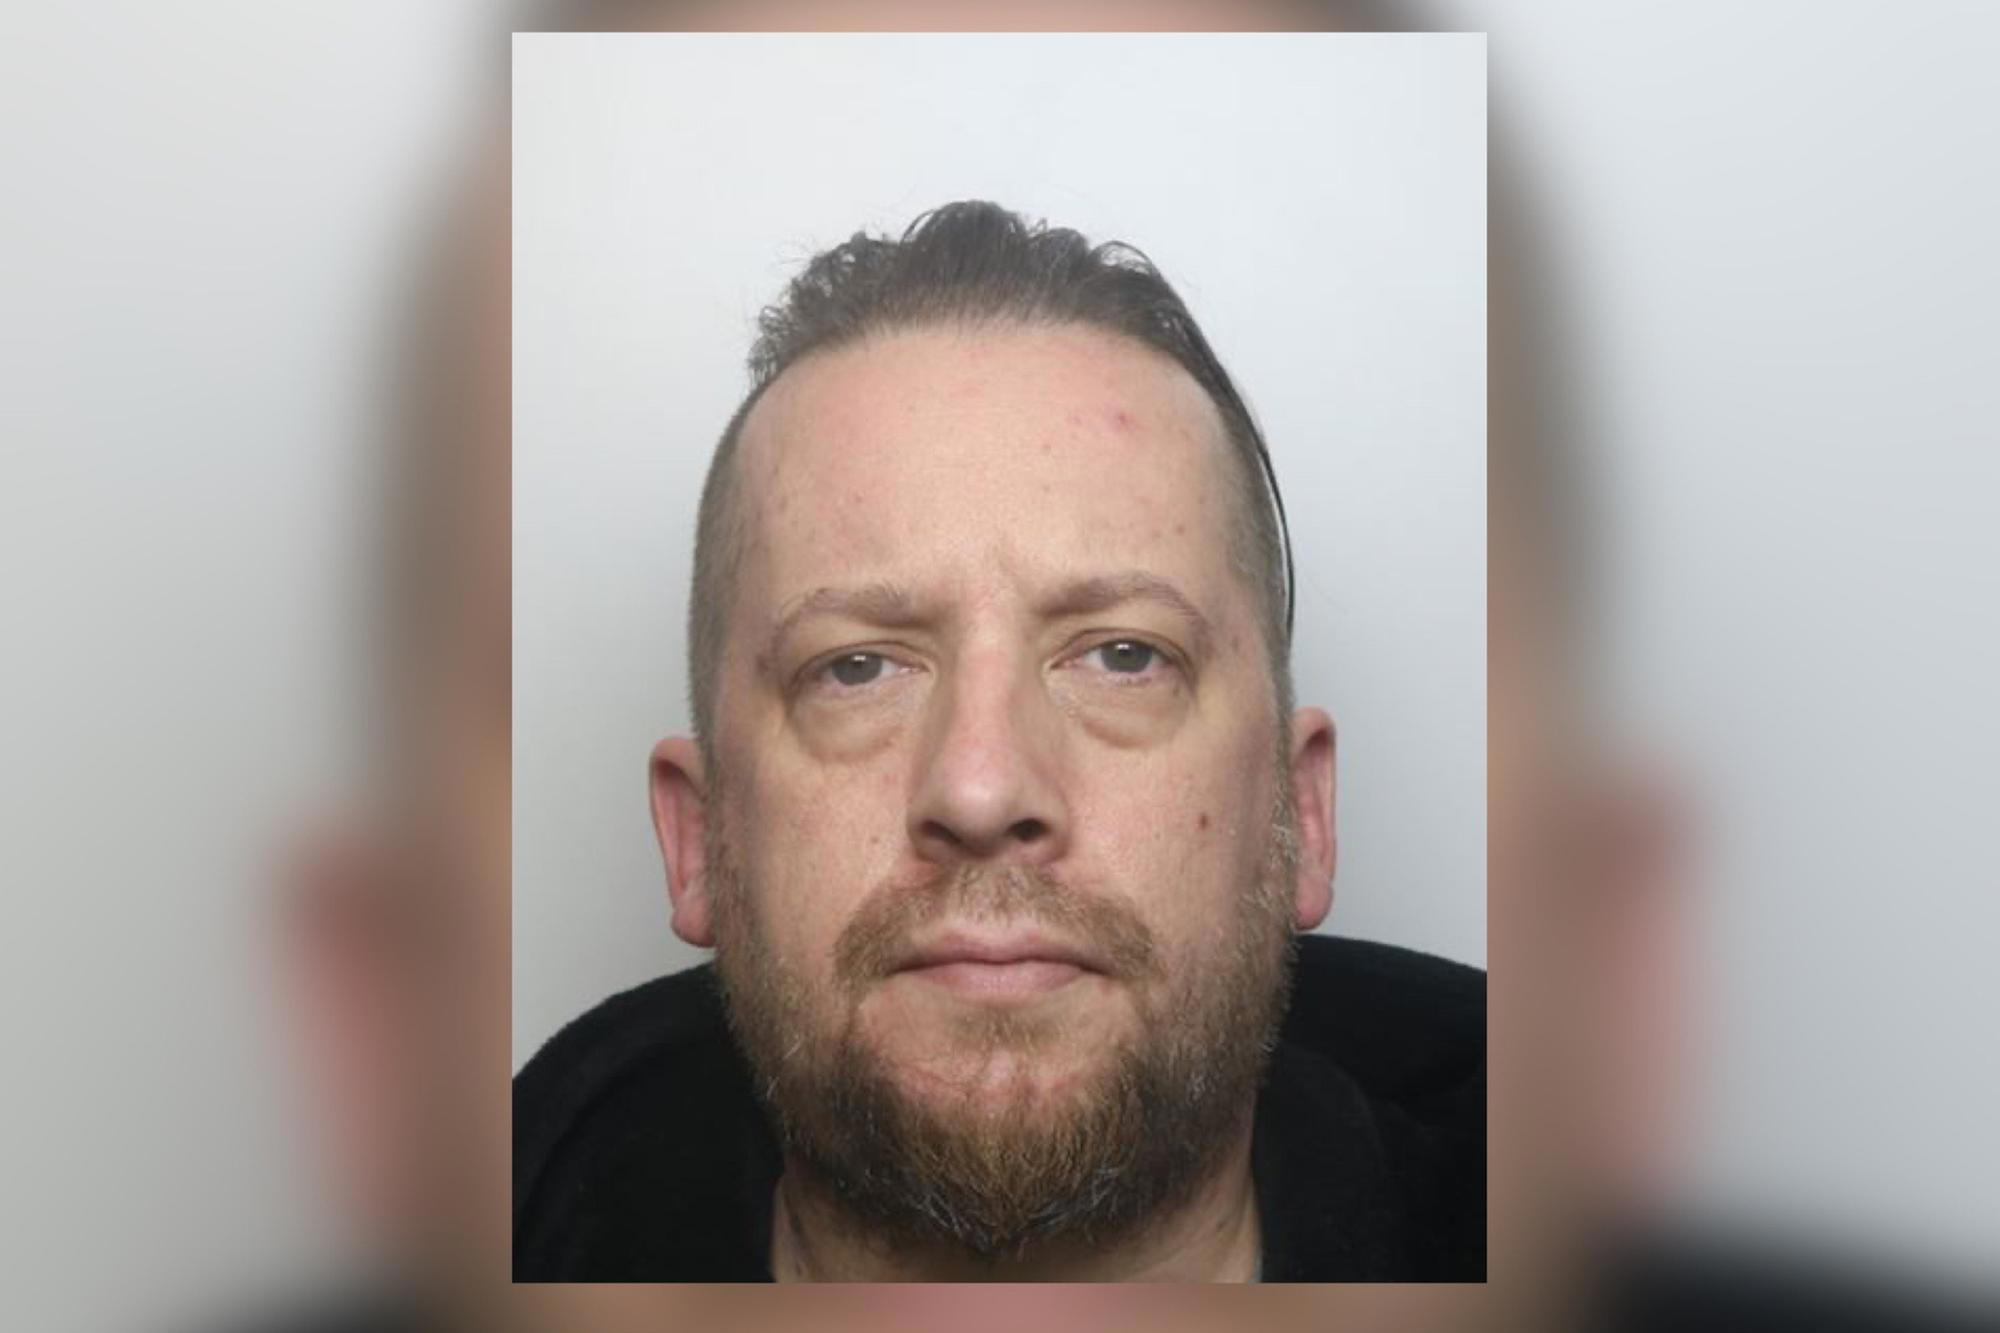 Northampton Paedophile Jailed After Sending Sexual Messages To Teenager And Images To Decoy